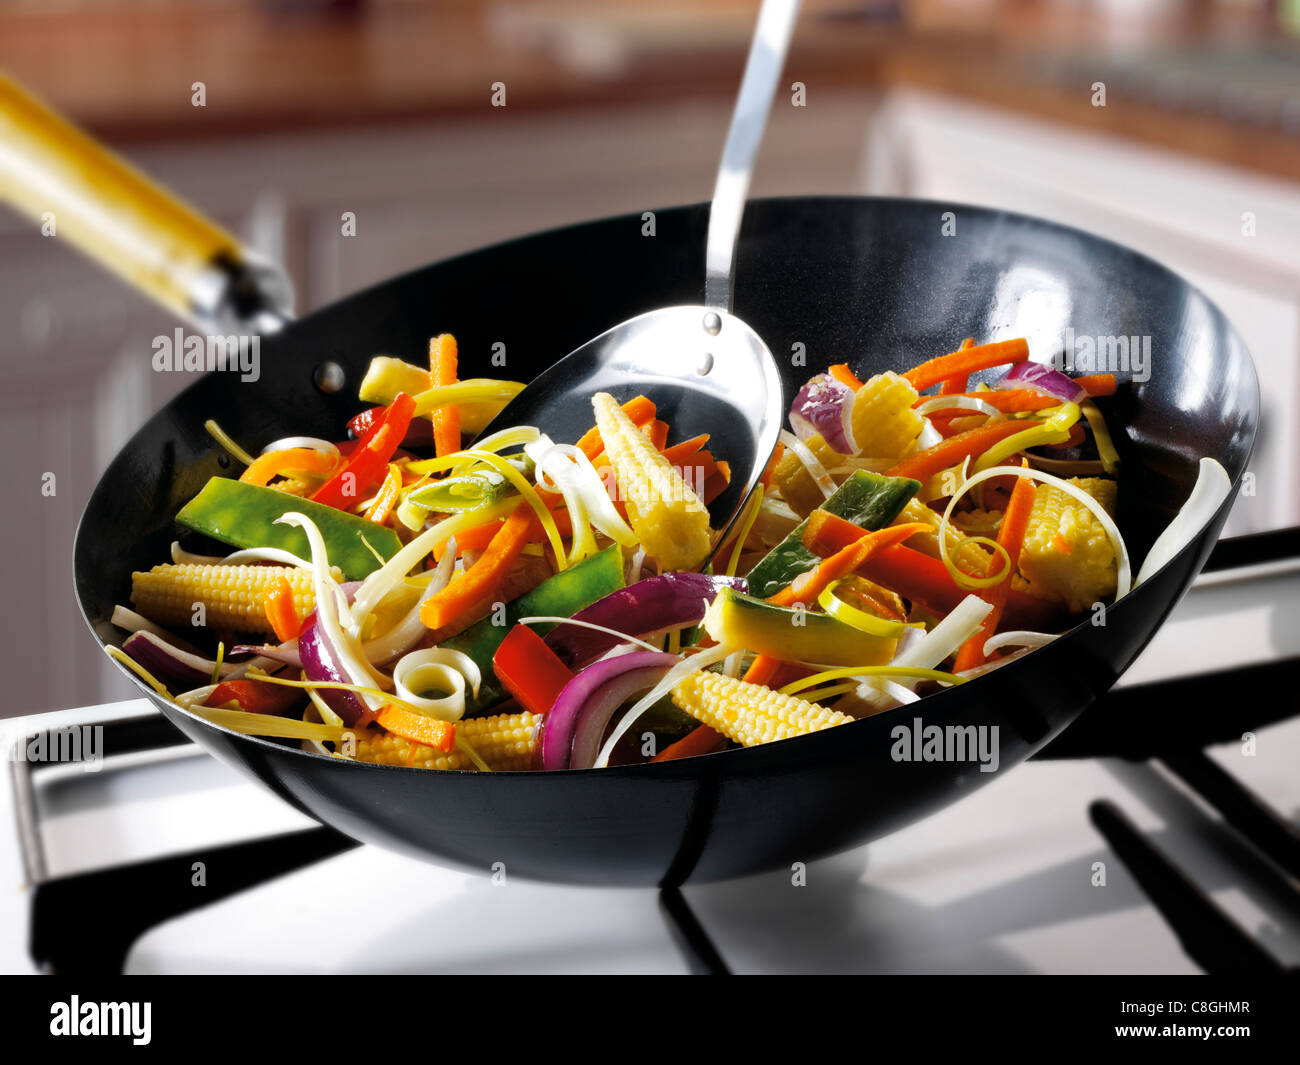 Corn stirfry being cooked in a wok Stock Photo